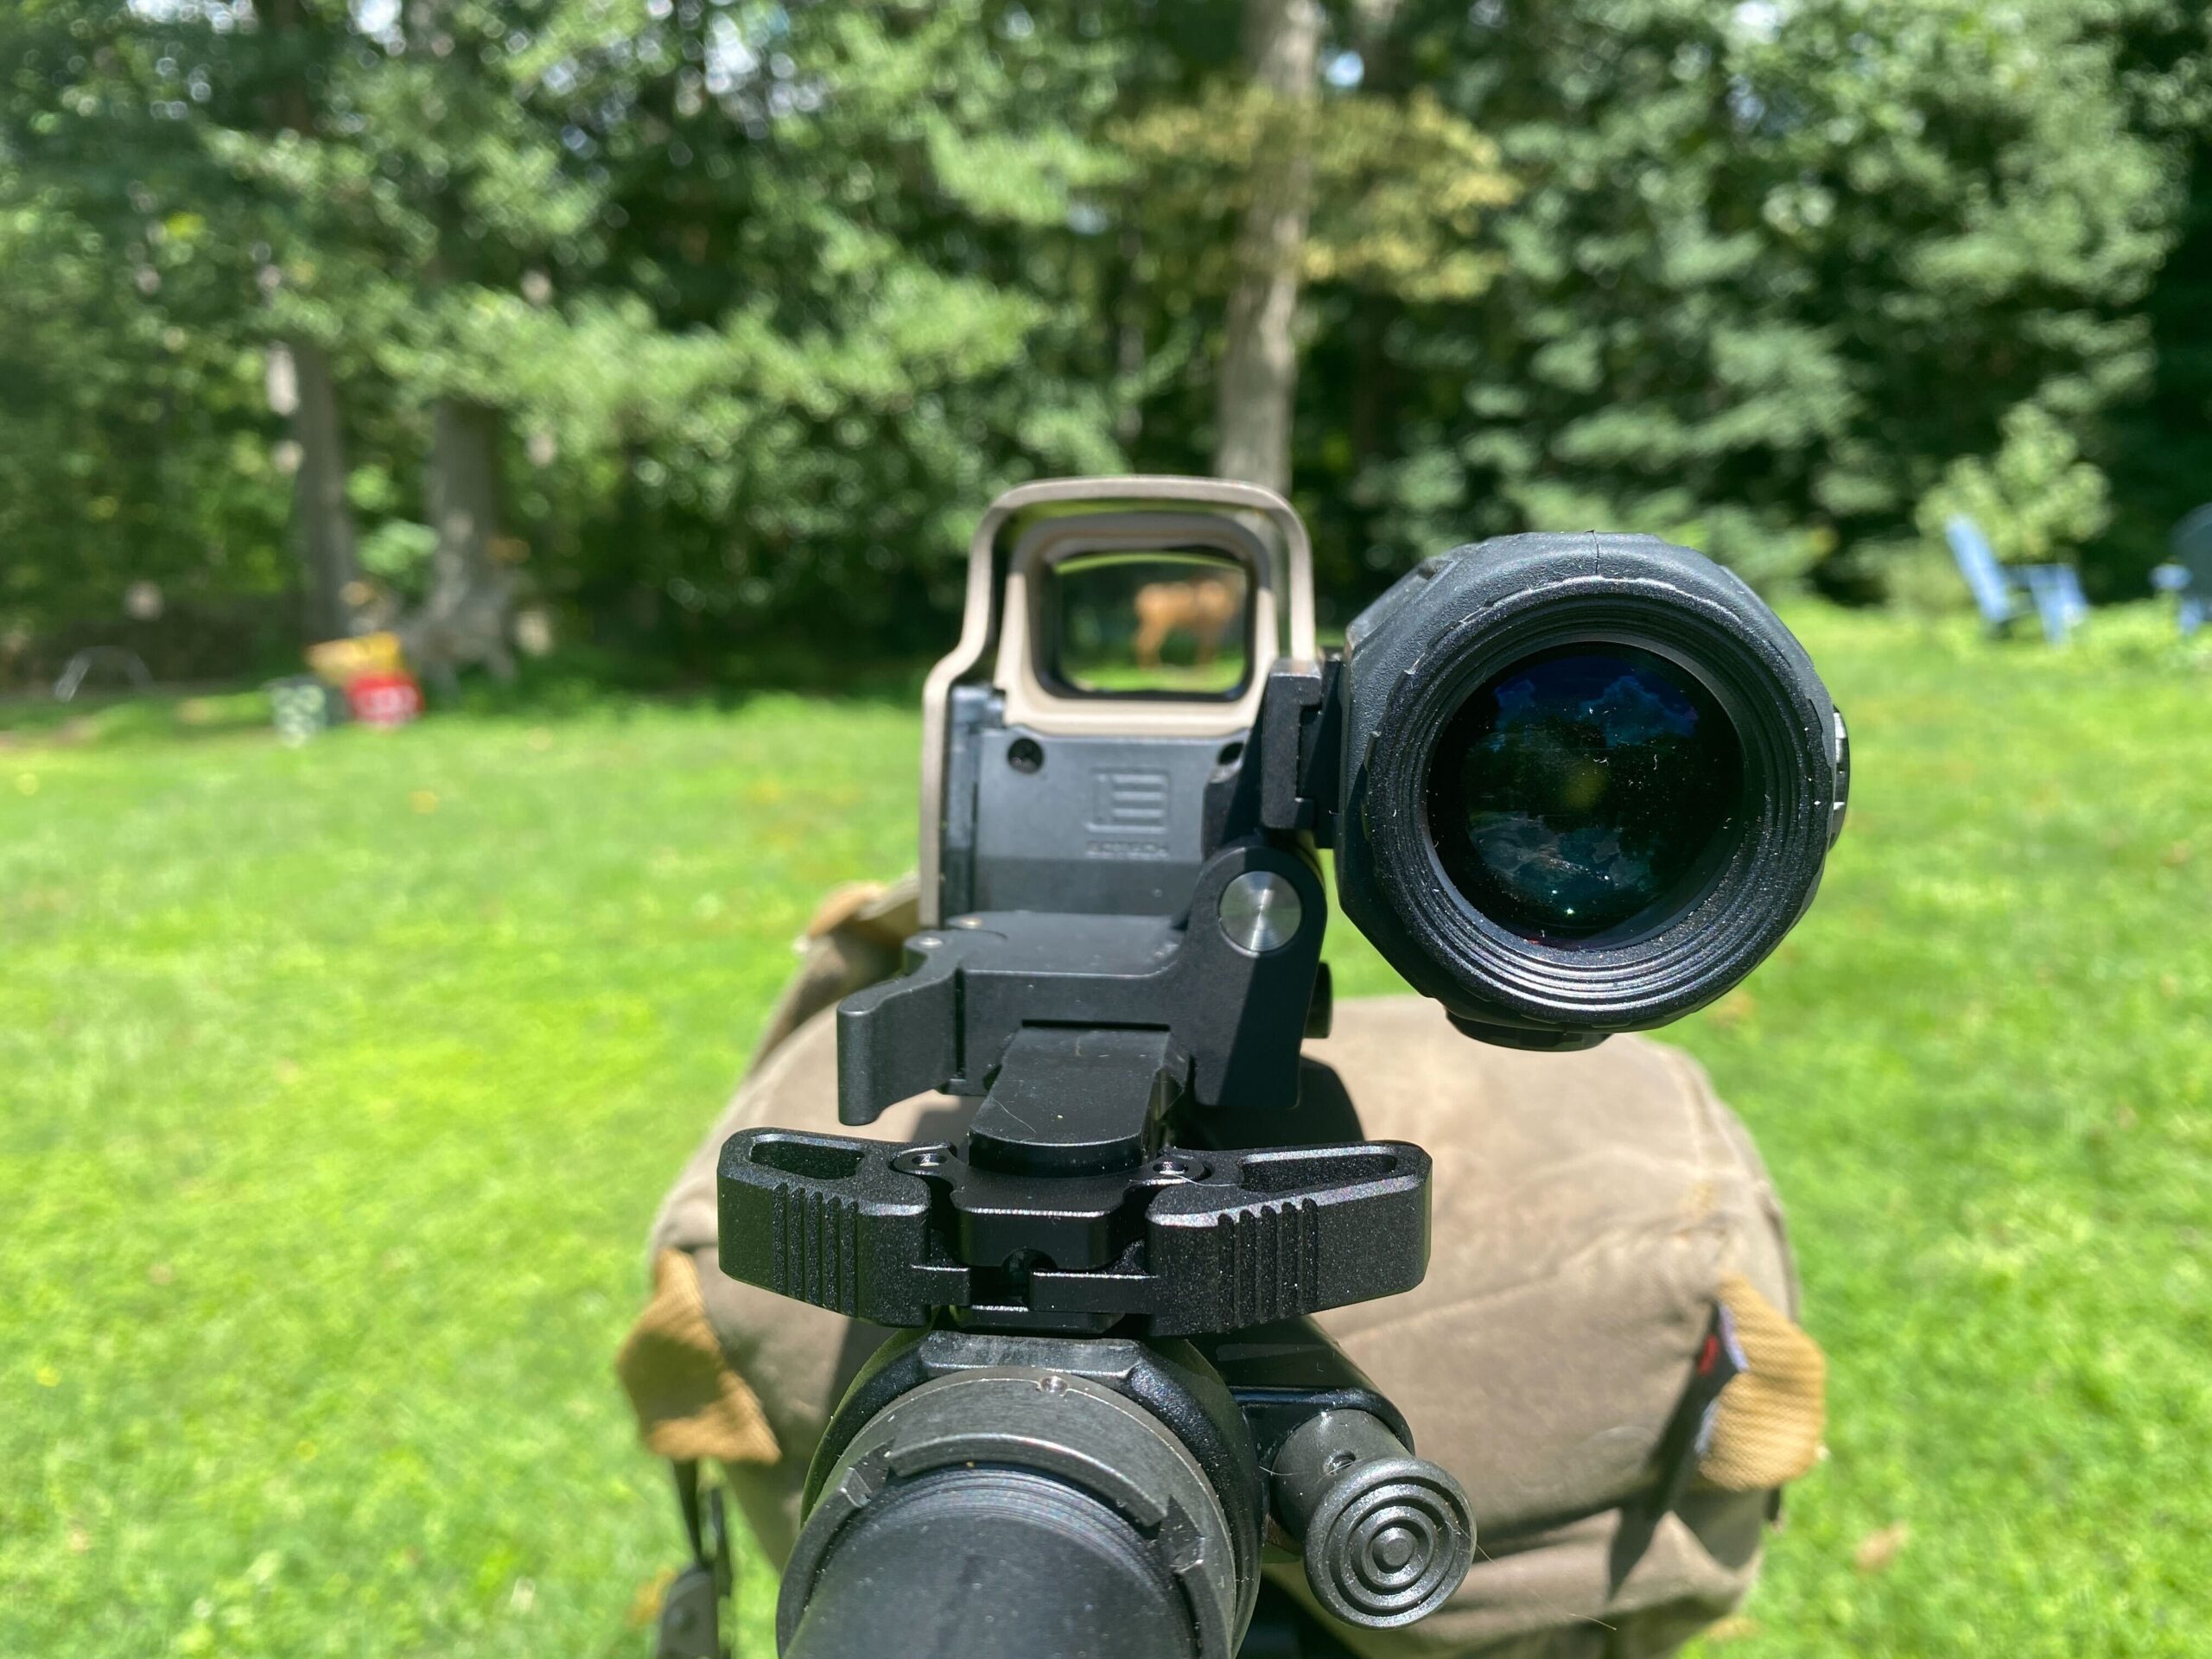 EOTECH G43 Magnifier and EXPS3 Holographic Sight